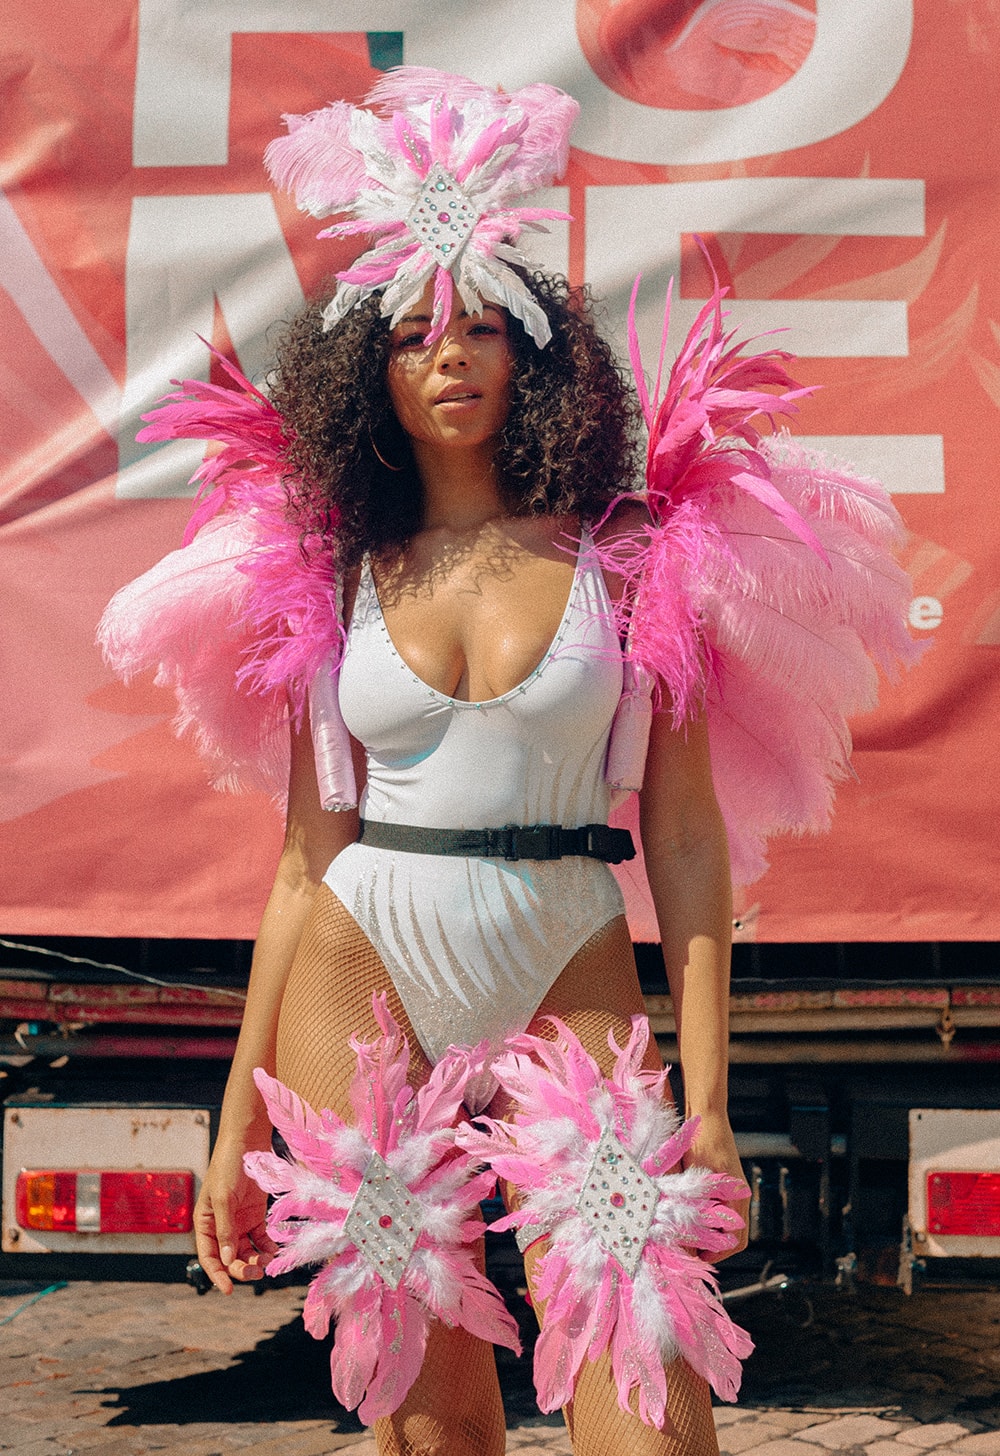 PUMA Cali Sneaker Celebrates Diversity For Notting Hill Carnival with Jade Laurice and Joelah Noble